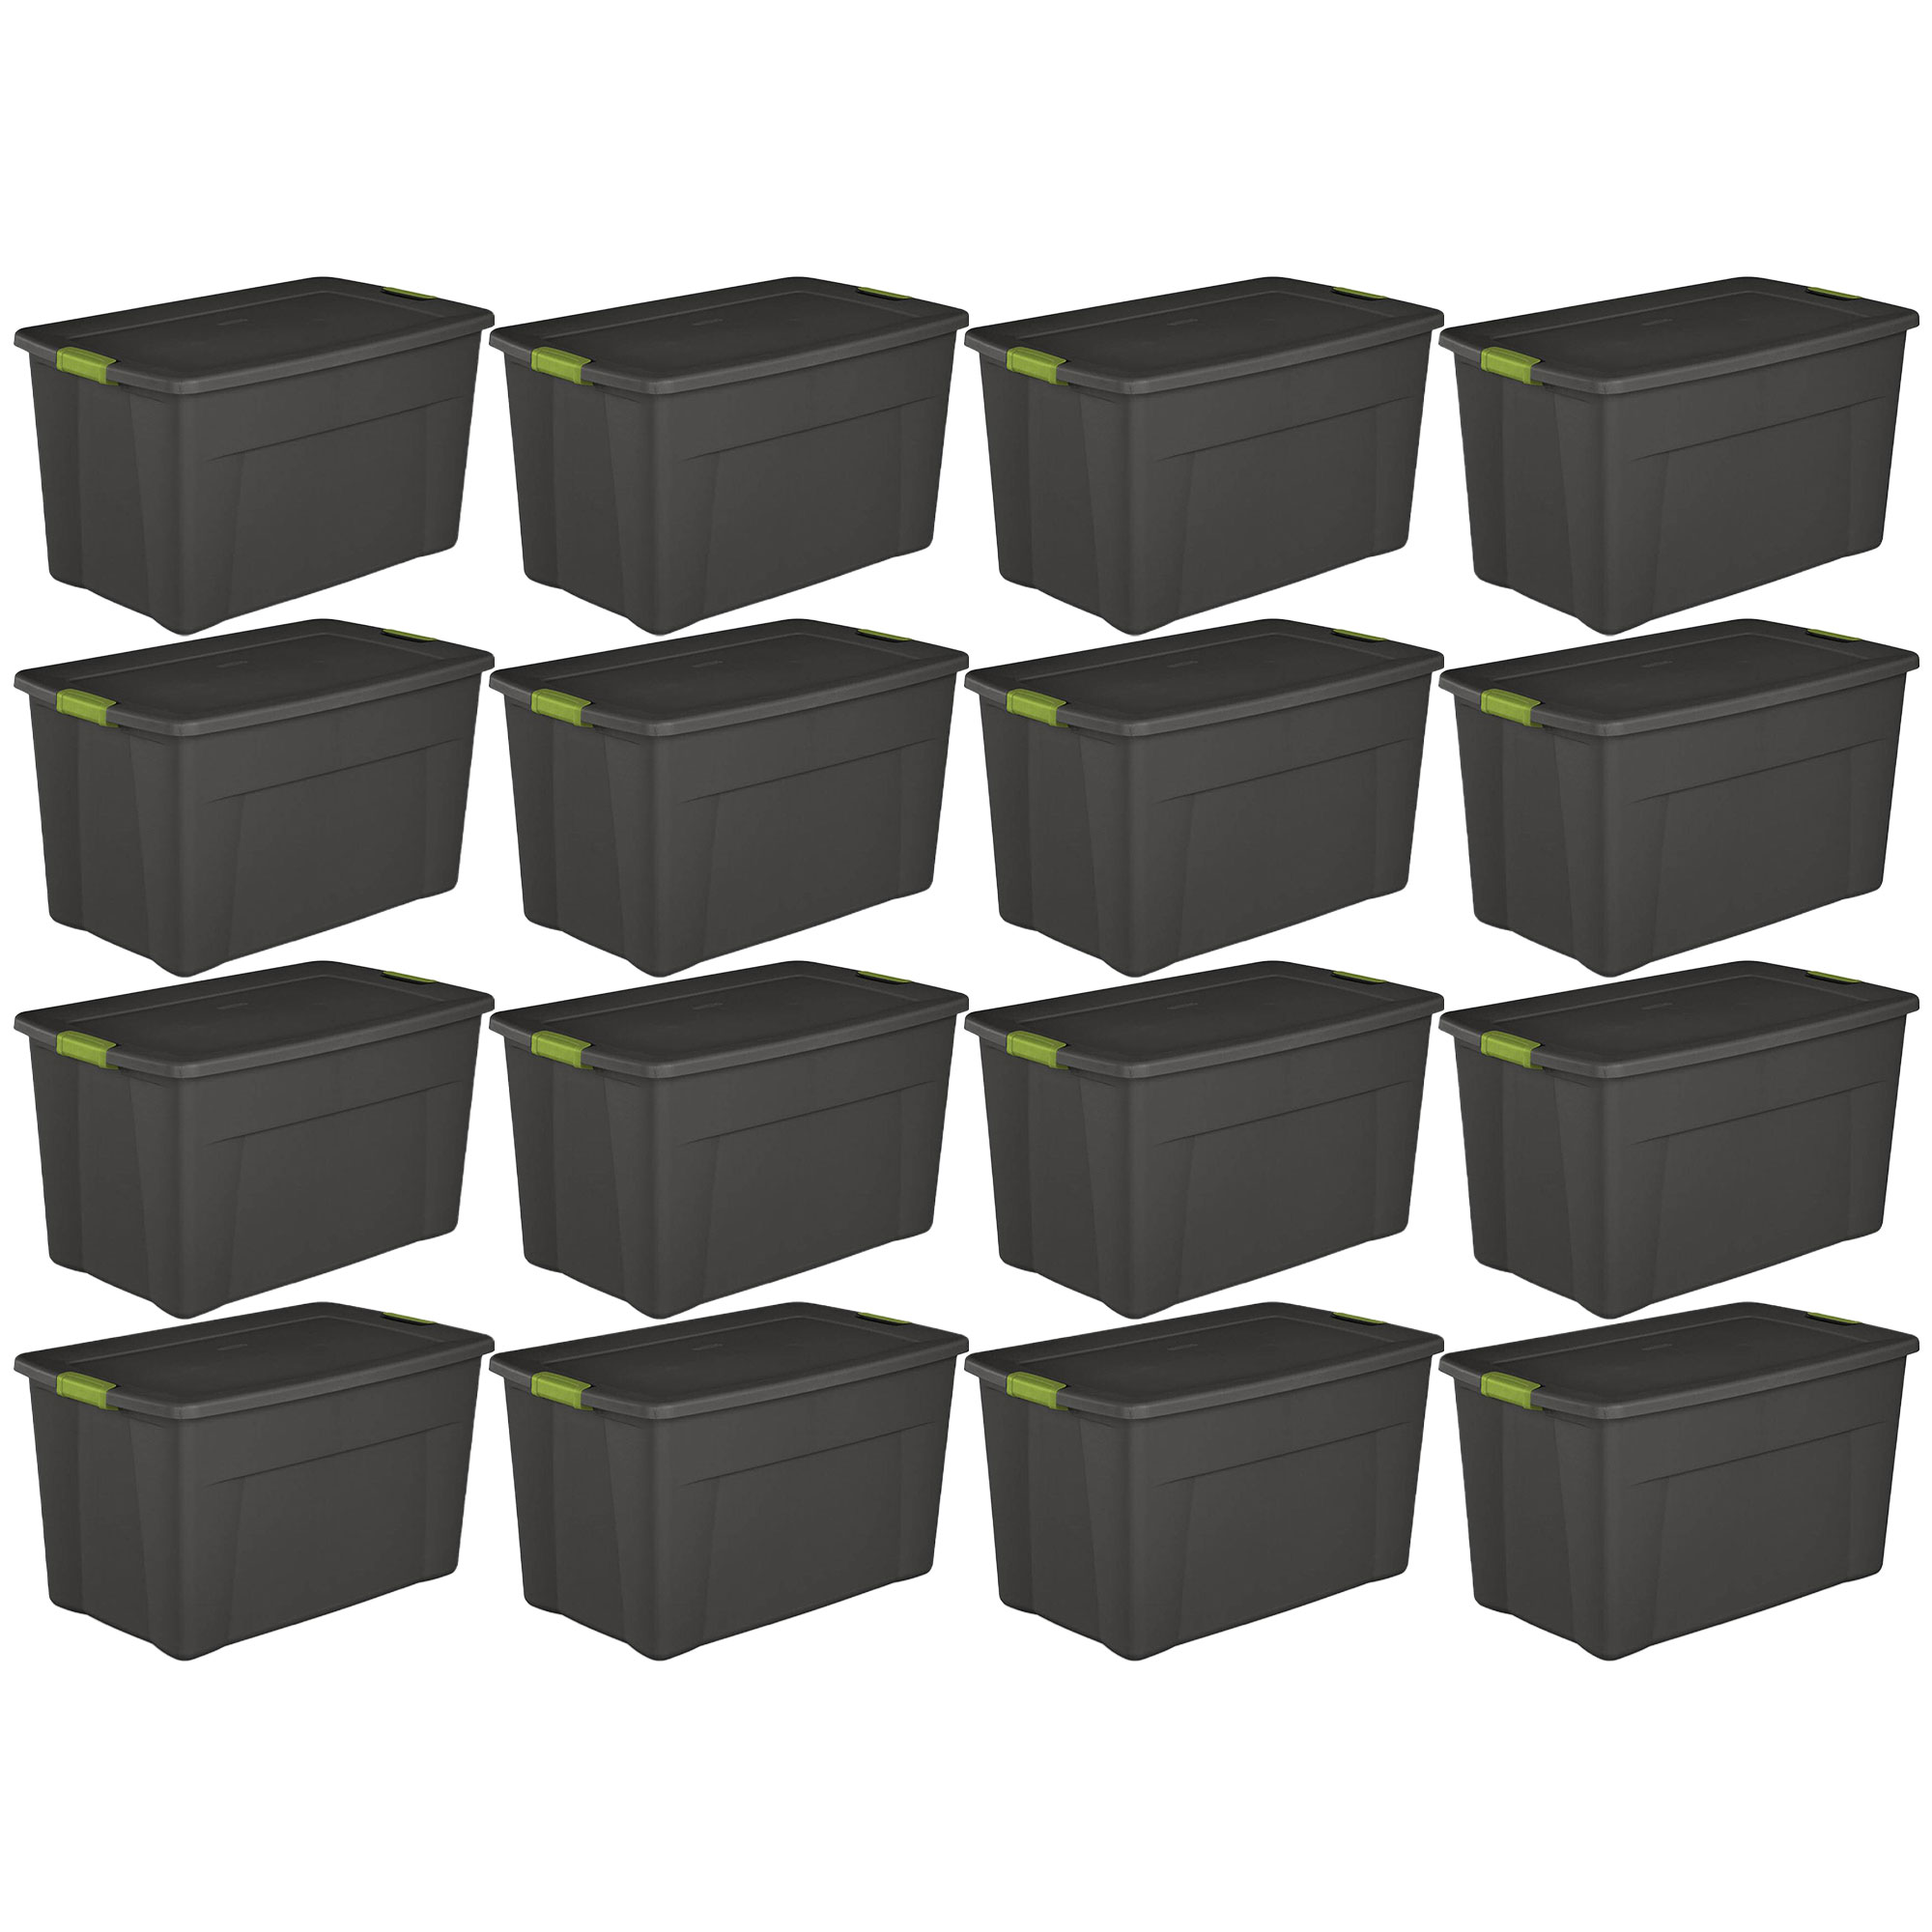 Sterilite 35 Gallon Storage Tote Box with Latching Container Lid, (16 Pack)  